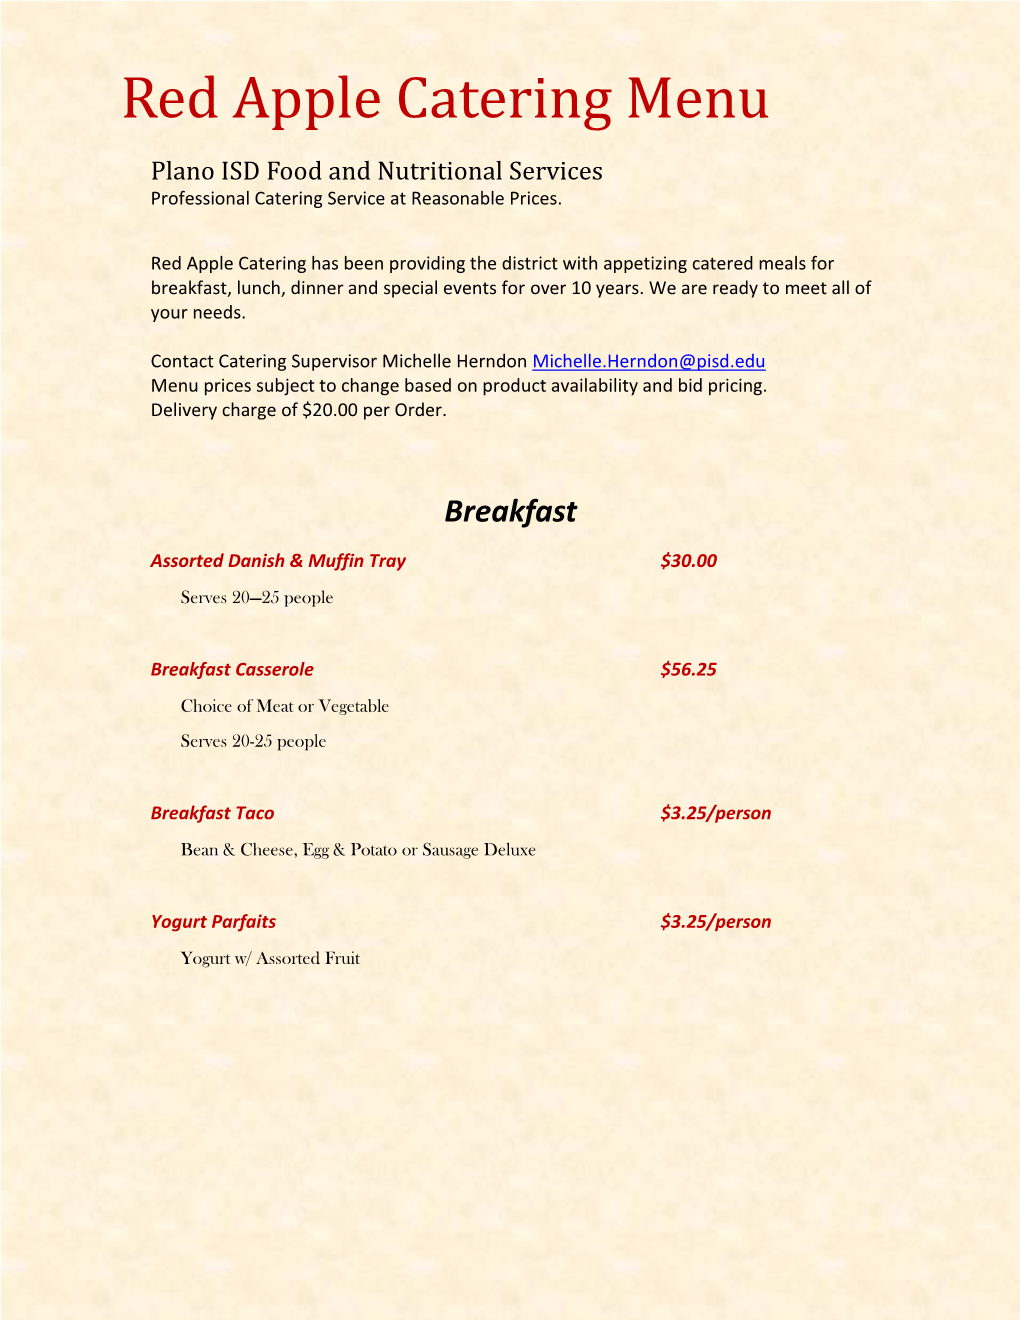 Red Apple Catering Menu Plano ISD Food and Nutritional Services Professional Catering Service at Reasonable Prices